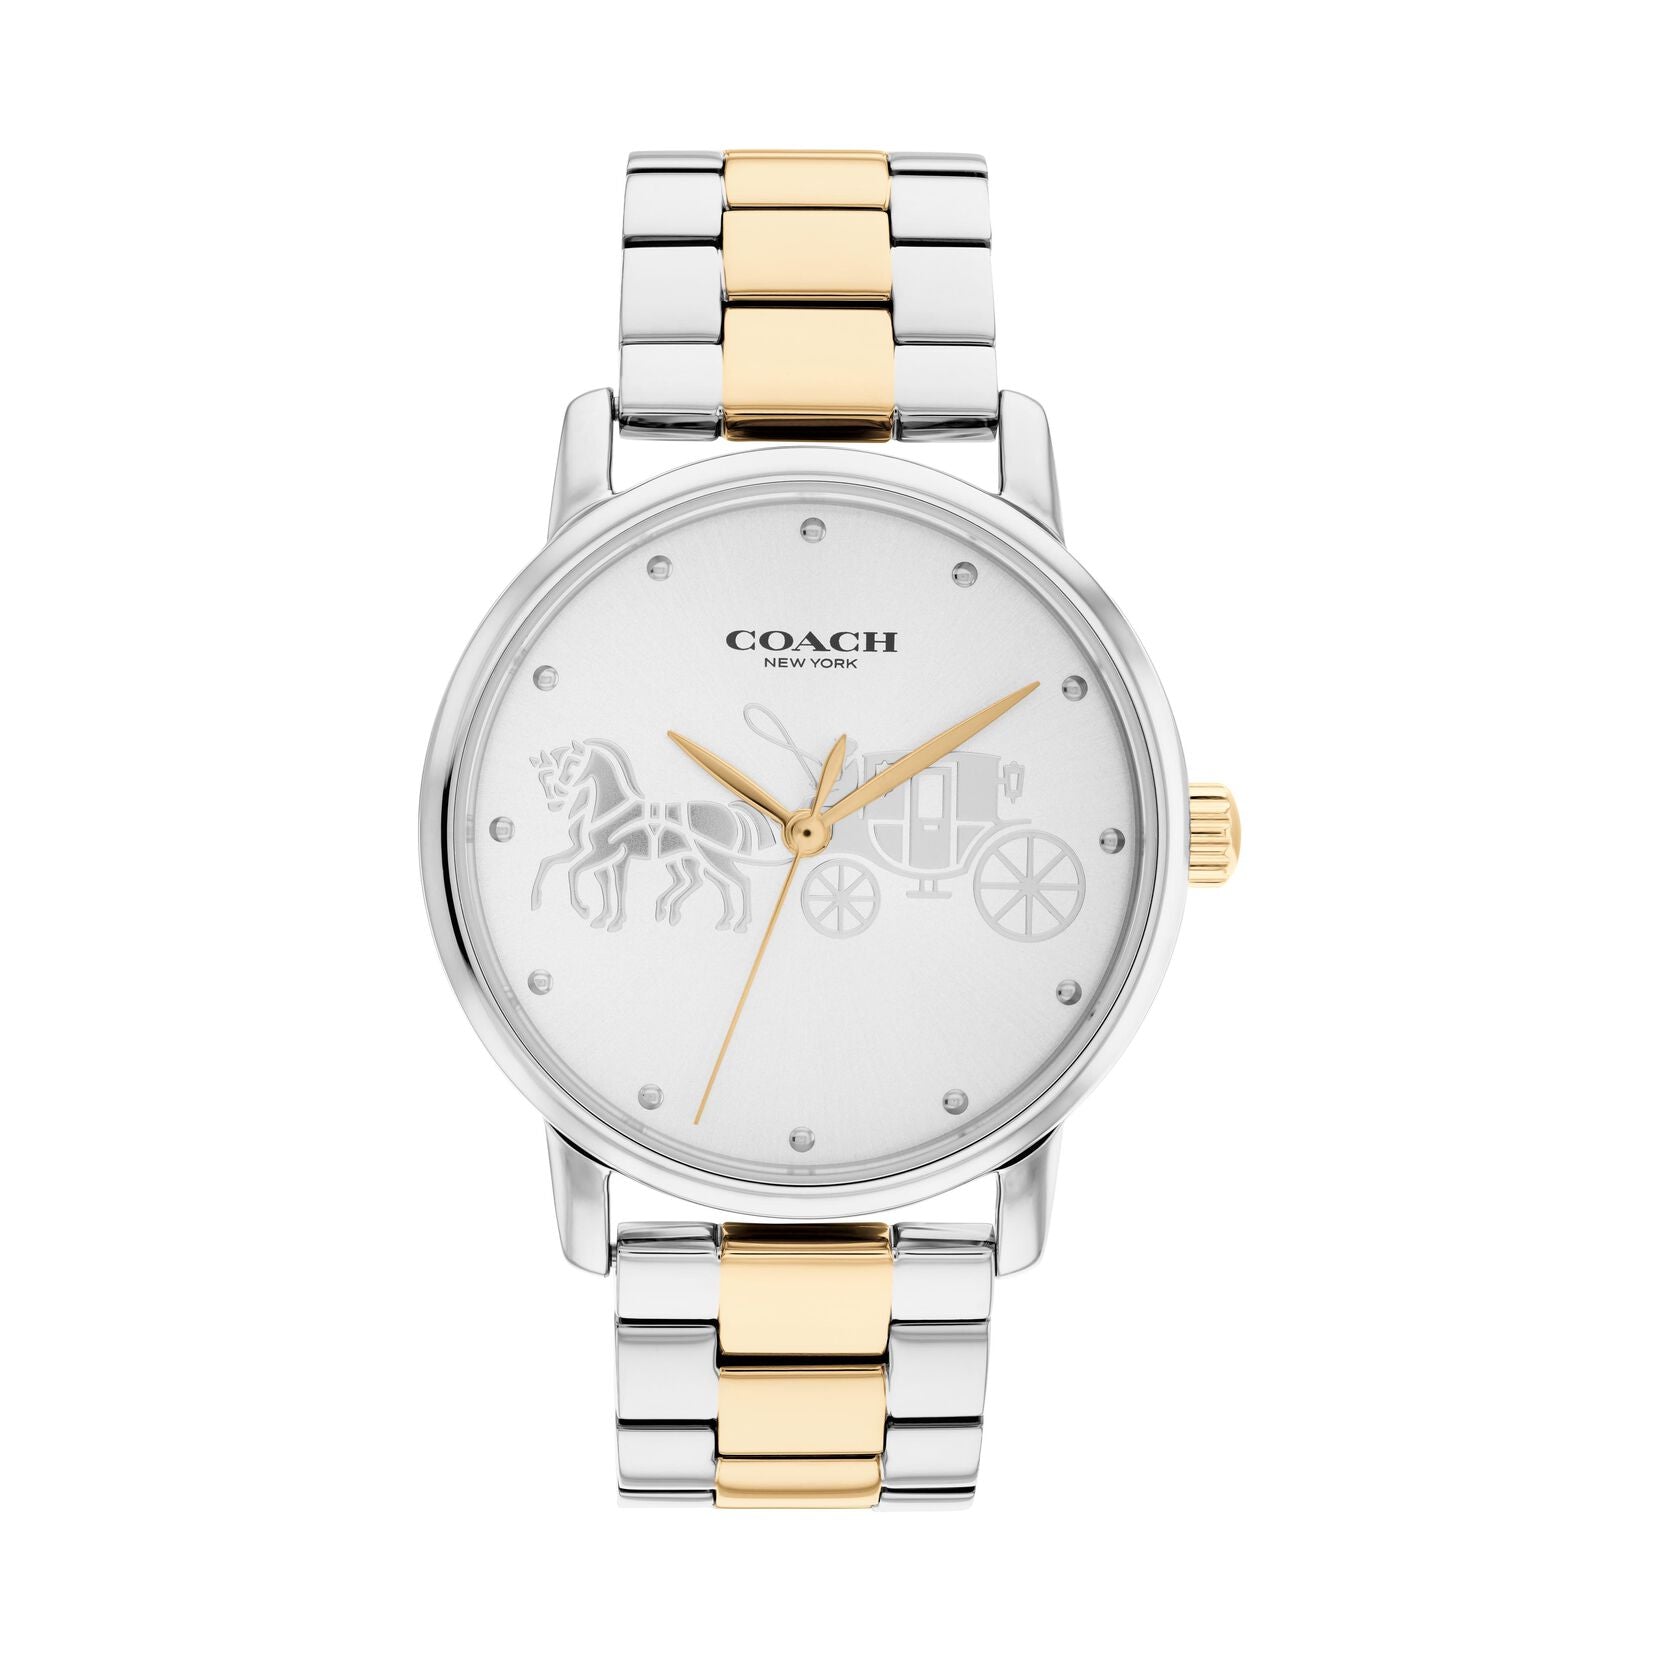 Coach Watches For Men and Women | Shop Online Now – Page 2